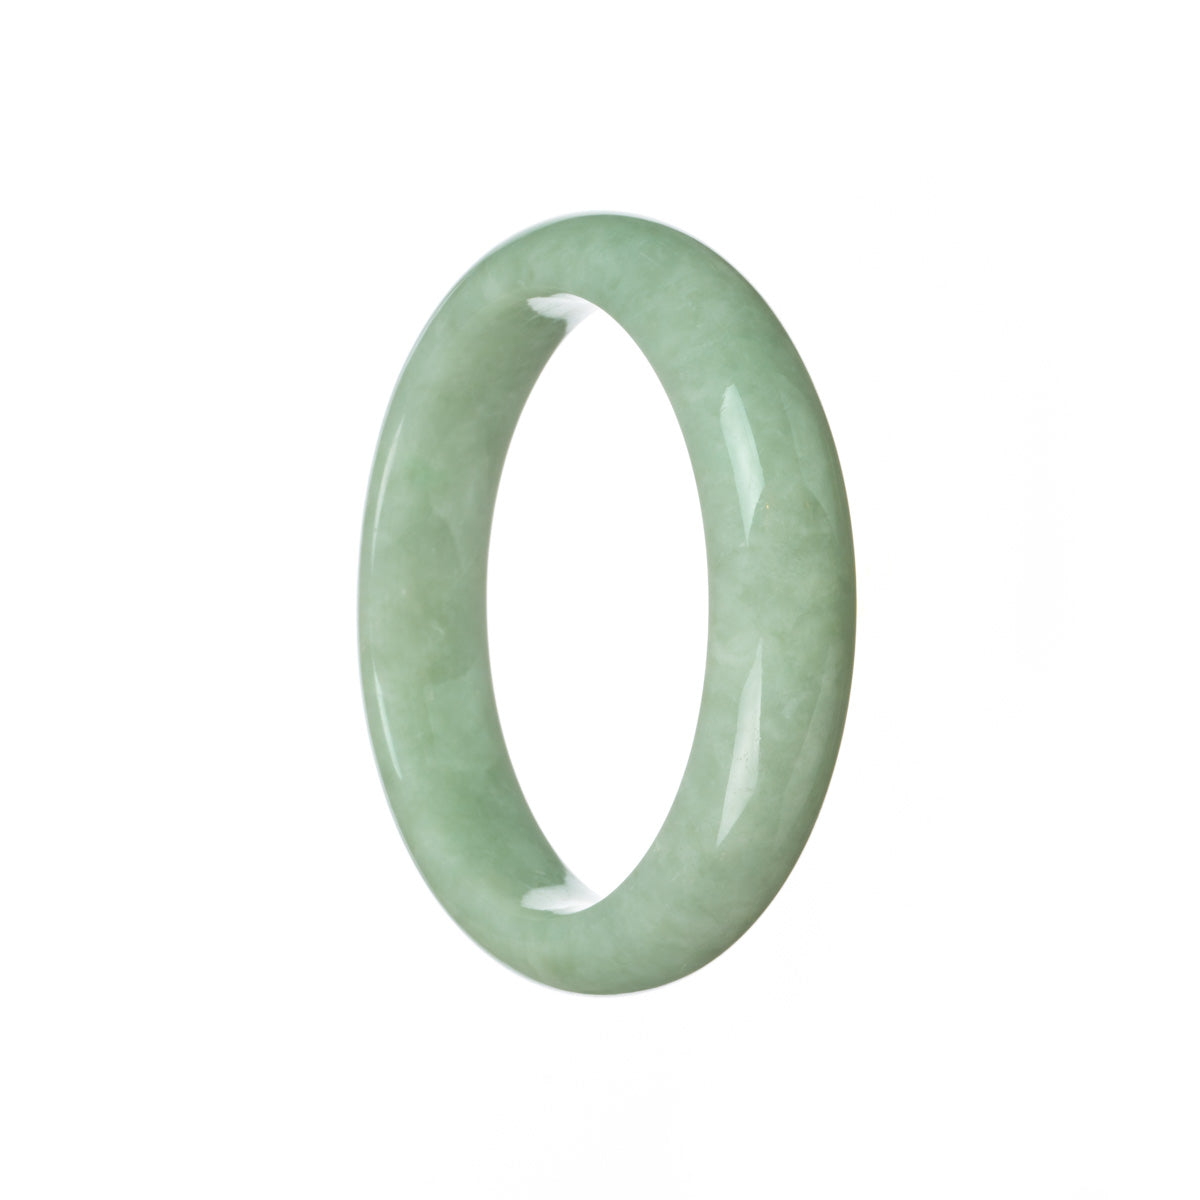 A light green Burma Jade bangle in half moon shape, Grade A quality, offered by MAYS GEMS.